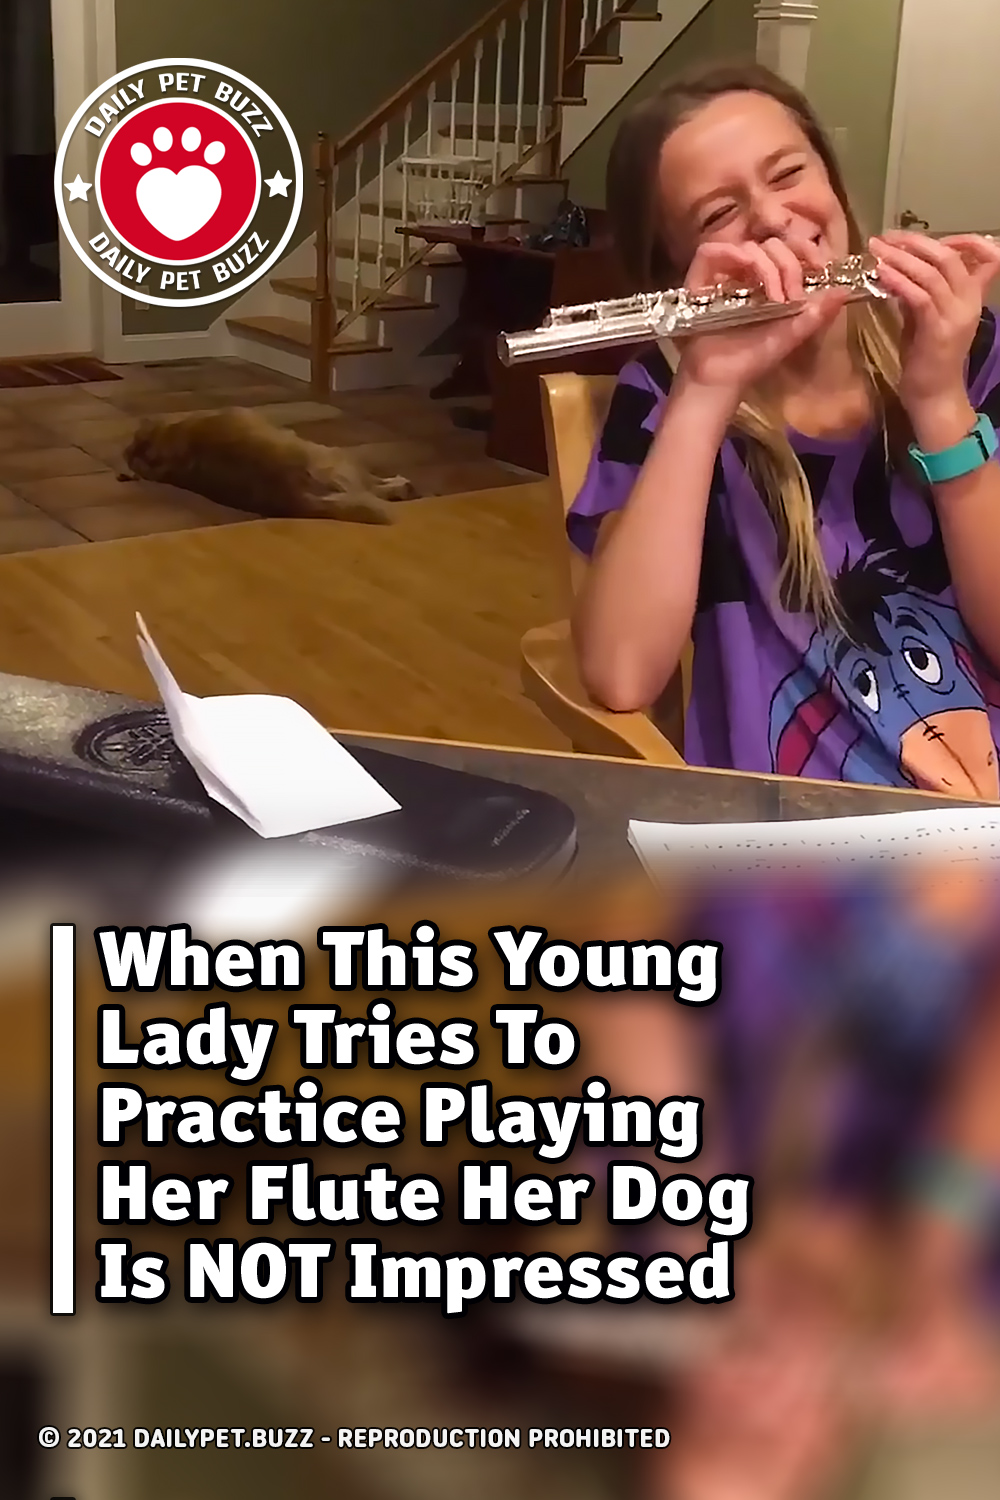 When This Young Lady Tries To Practice Playing Her Flute Her Dog Is NOT Impressed